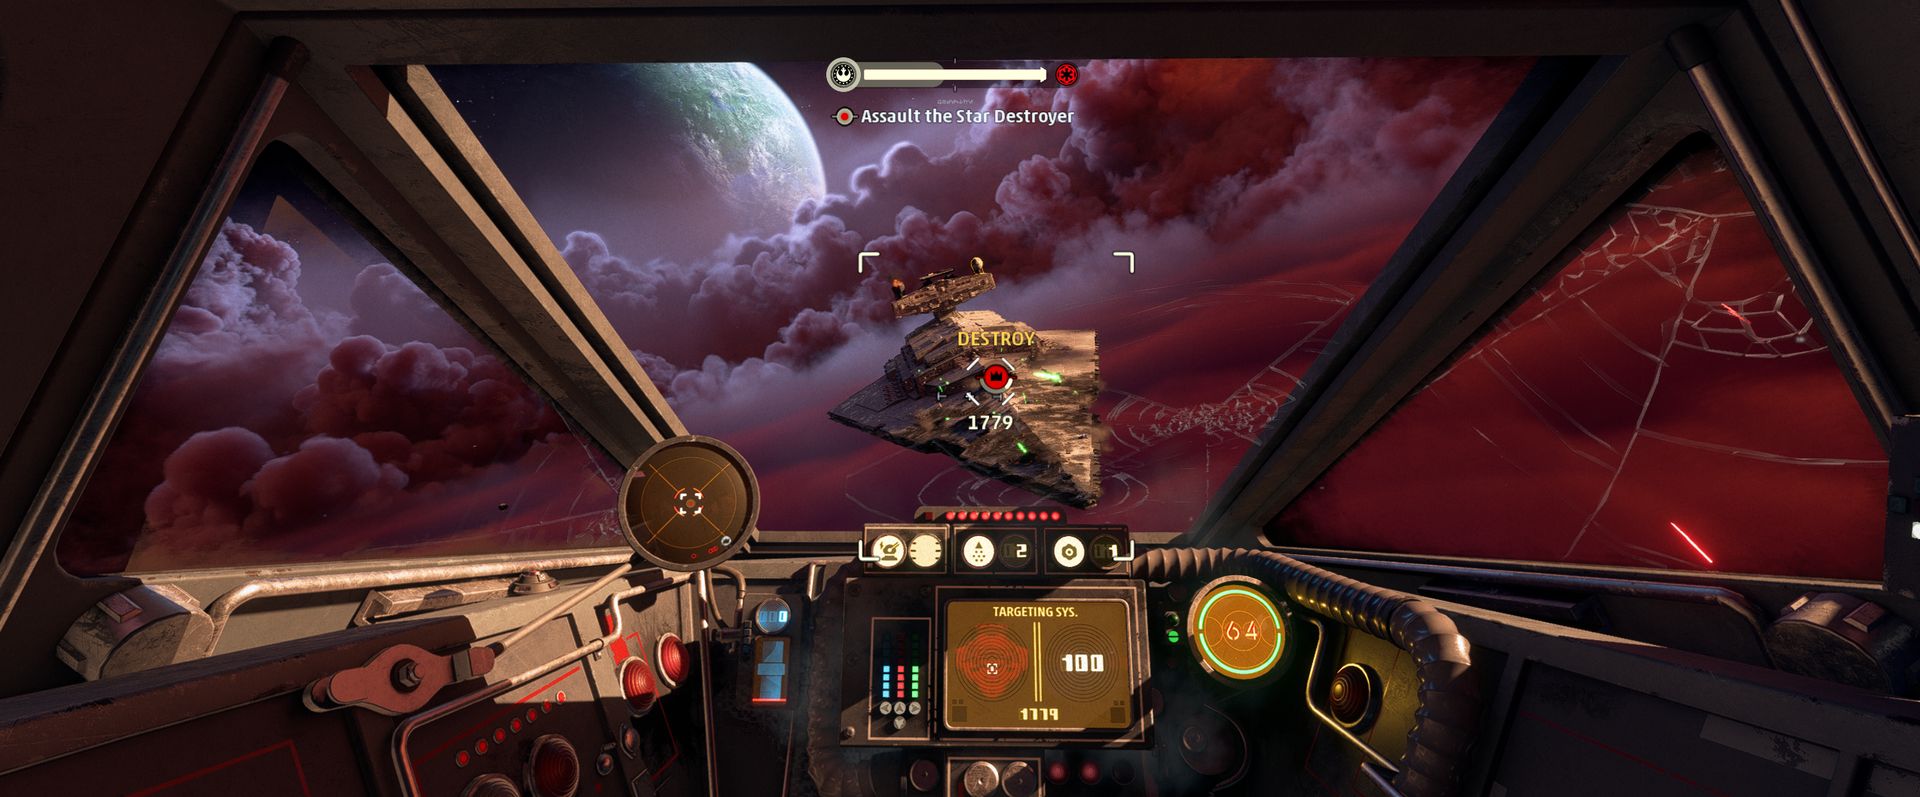 How to play Star Wars Squadrons in VR?